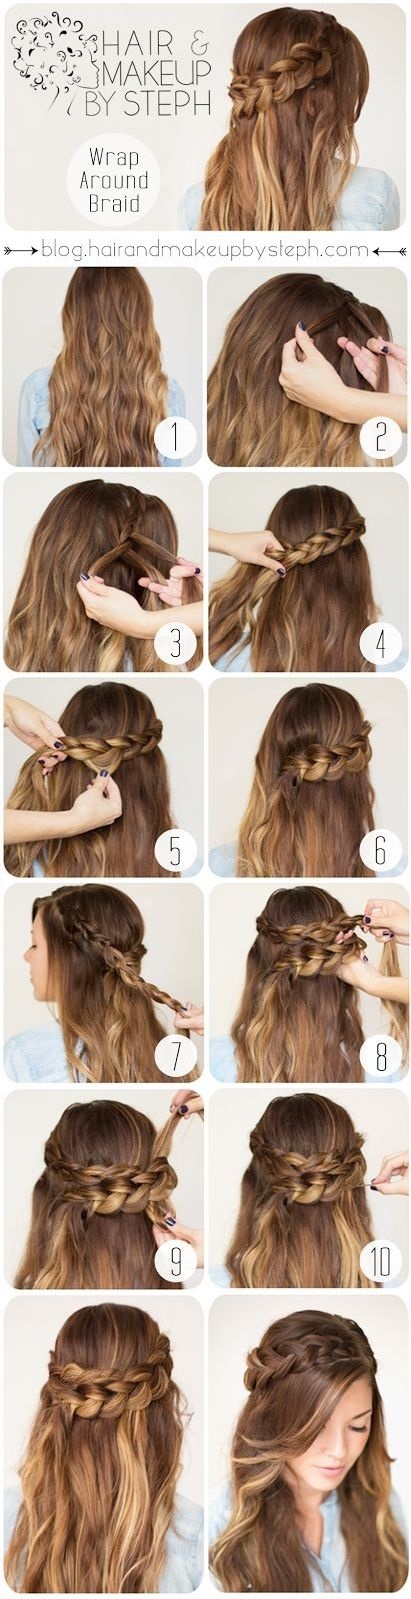 braided-hairstyles-for-thick-hair-02_9 Braided hairstyles for thick hair